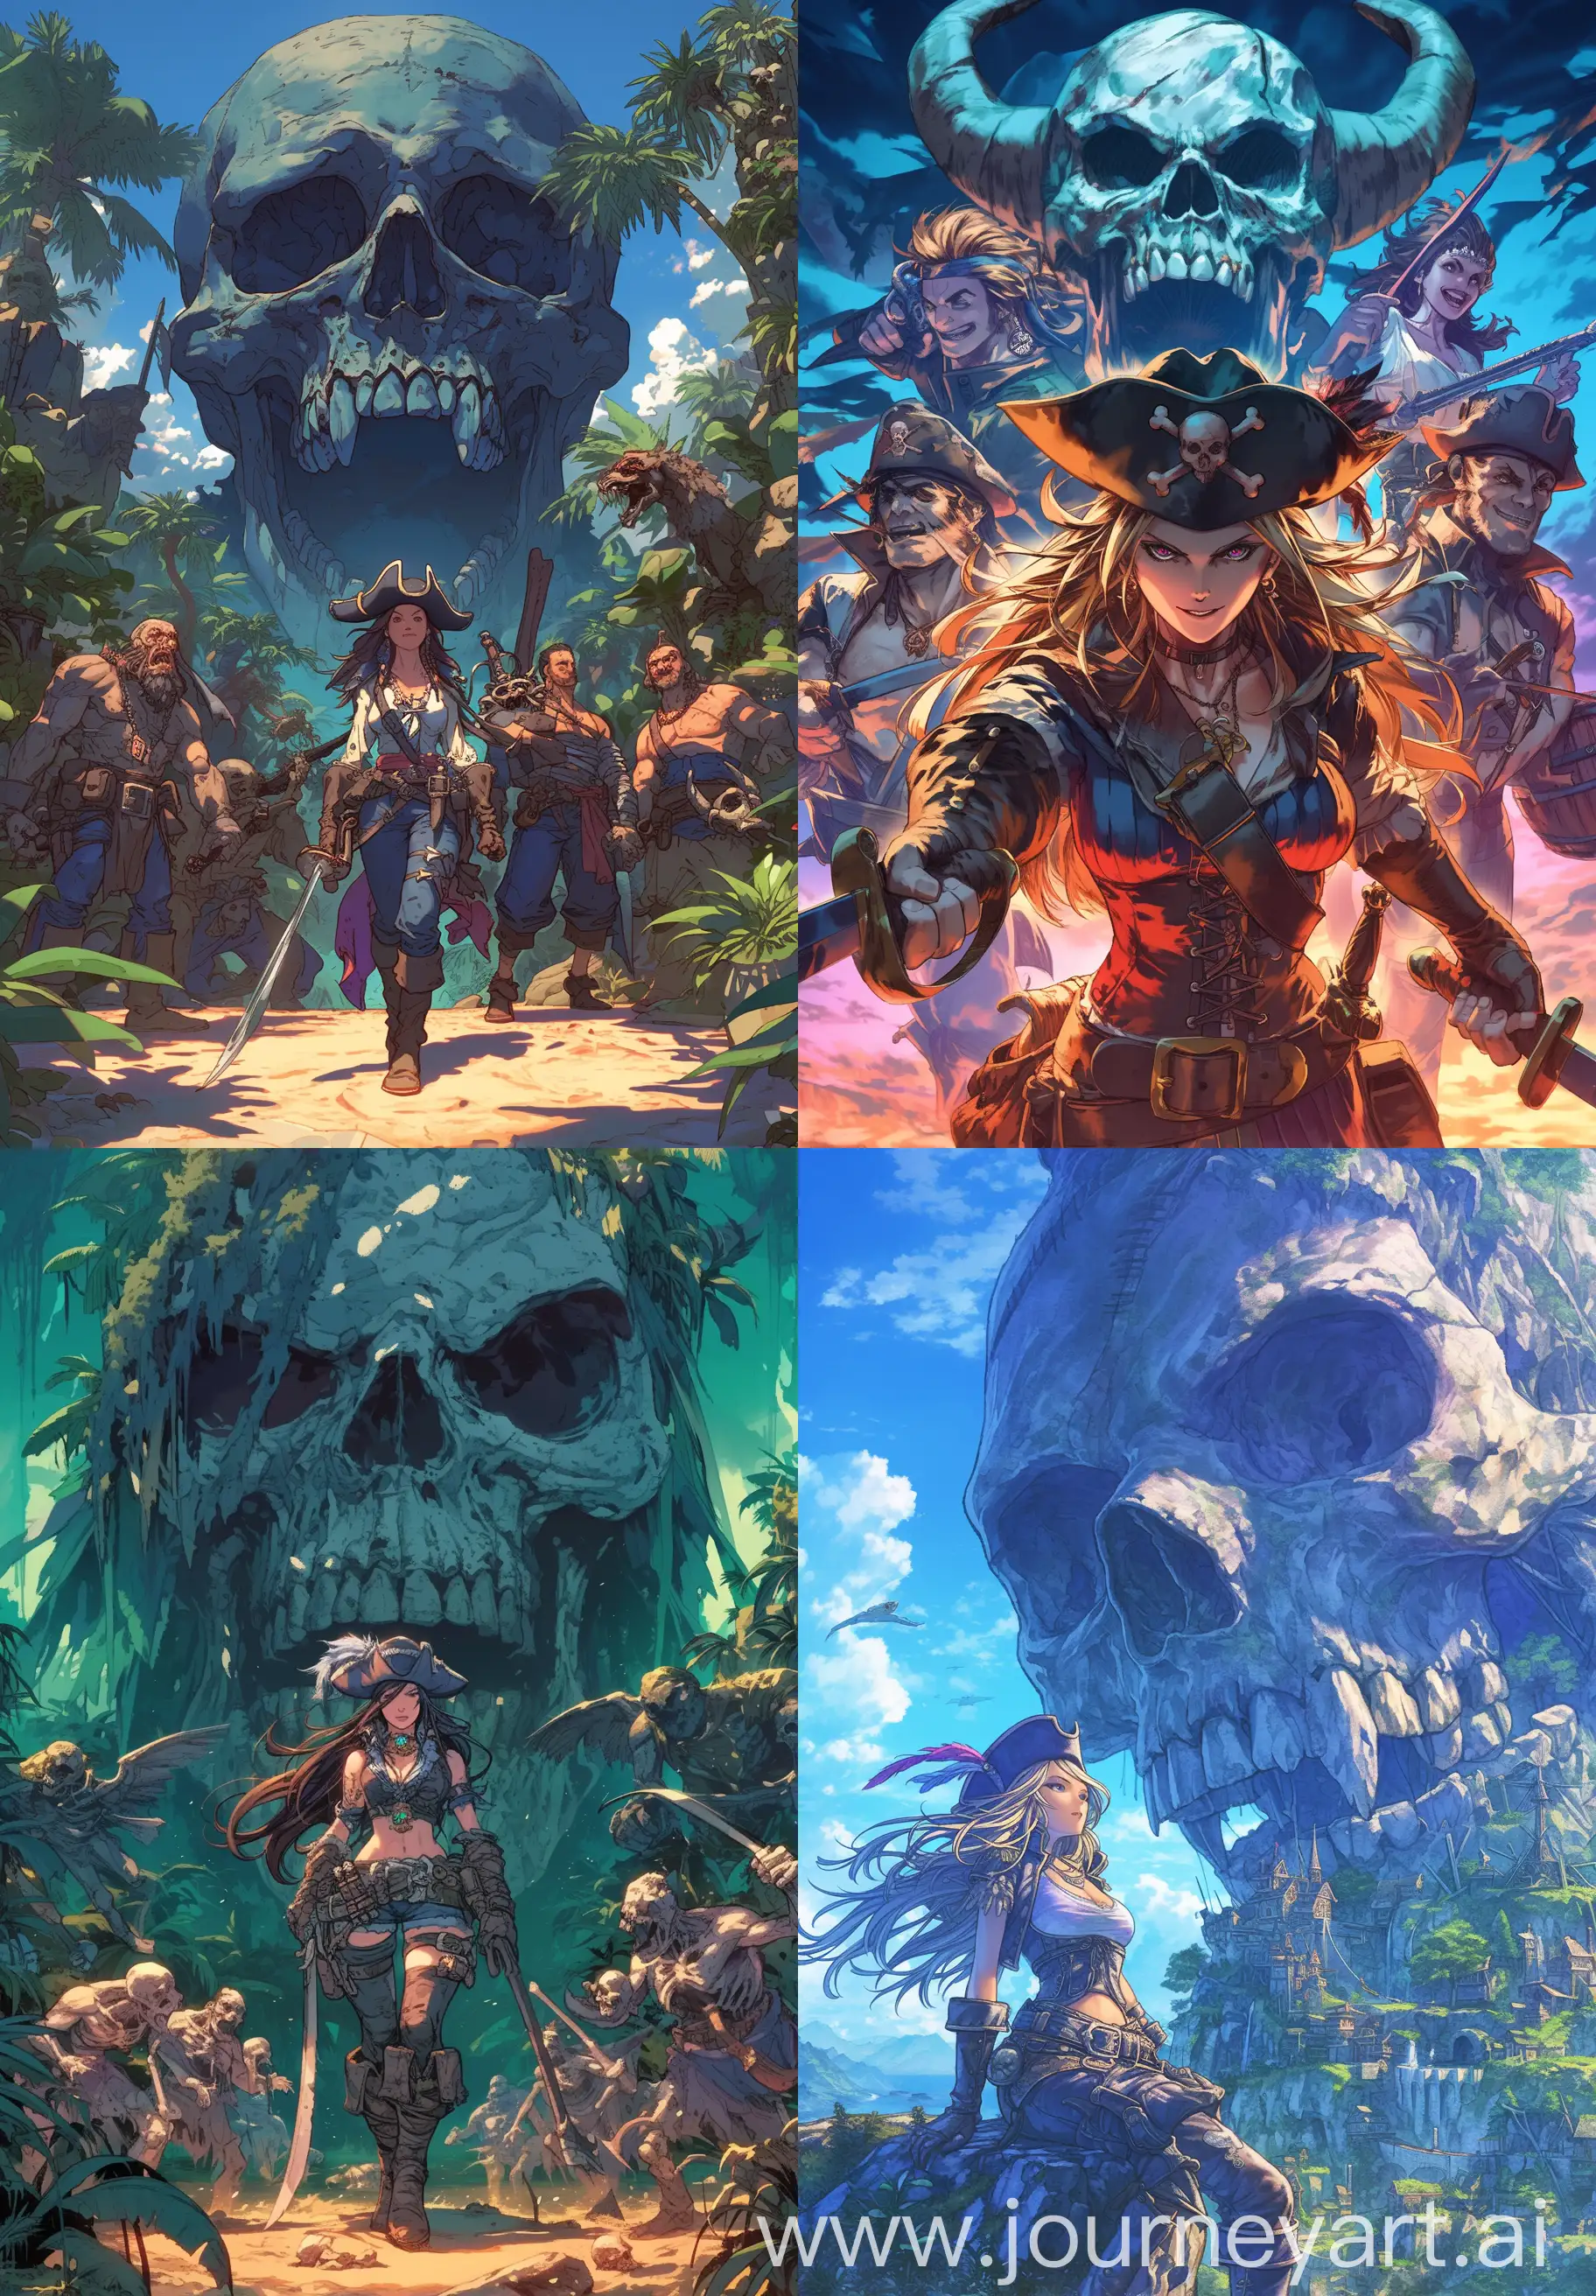 Brave-Female-Pirate-Captains-Quest-for-Treasure-on-Mysterious-Skull-Island